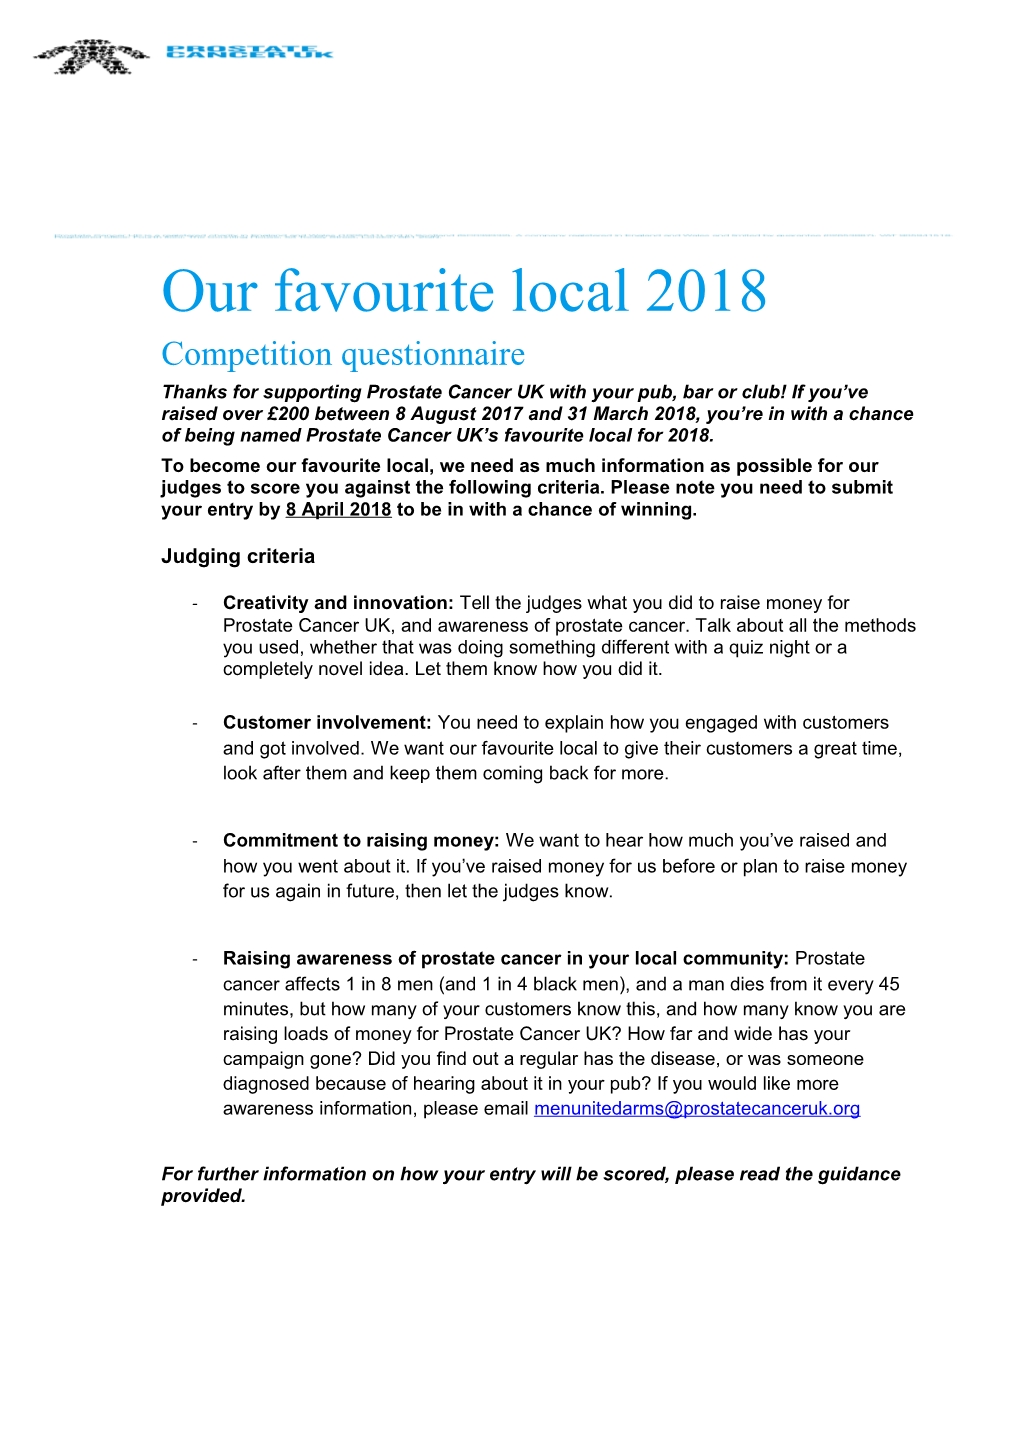 Our Favourite Local 2018